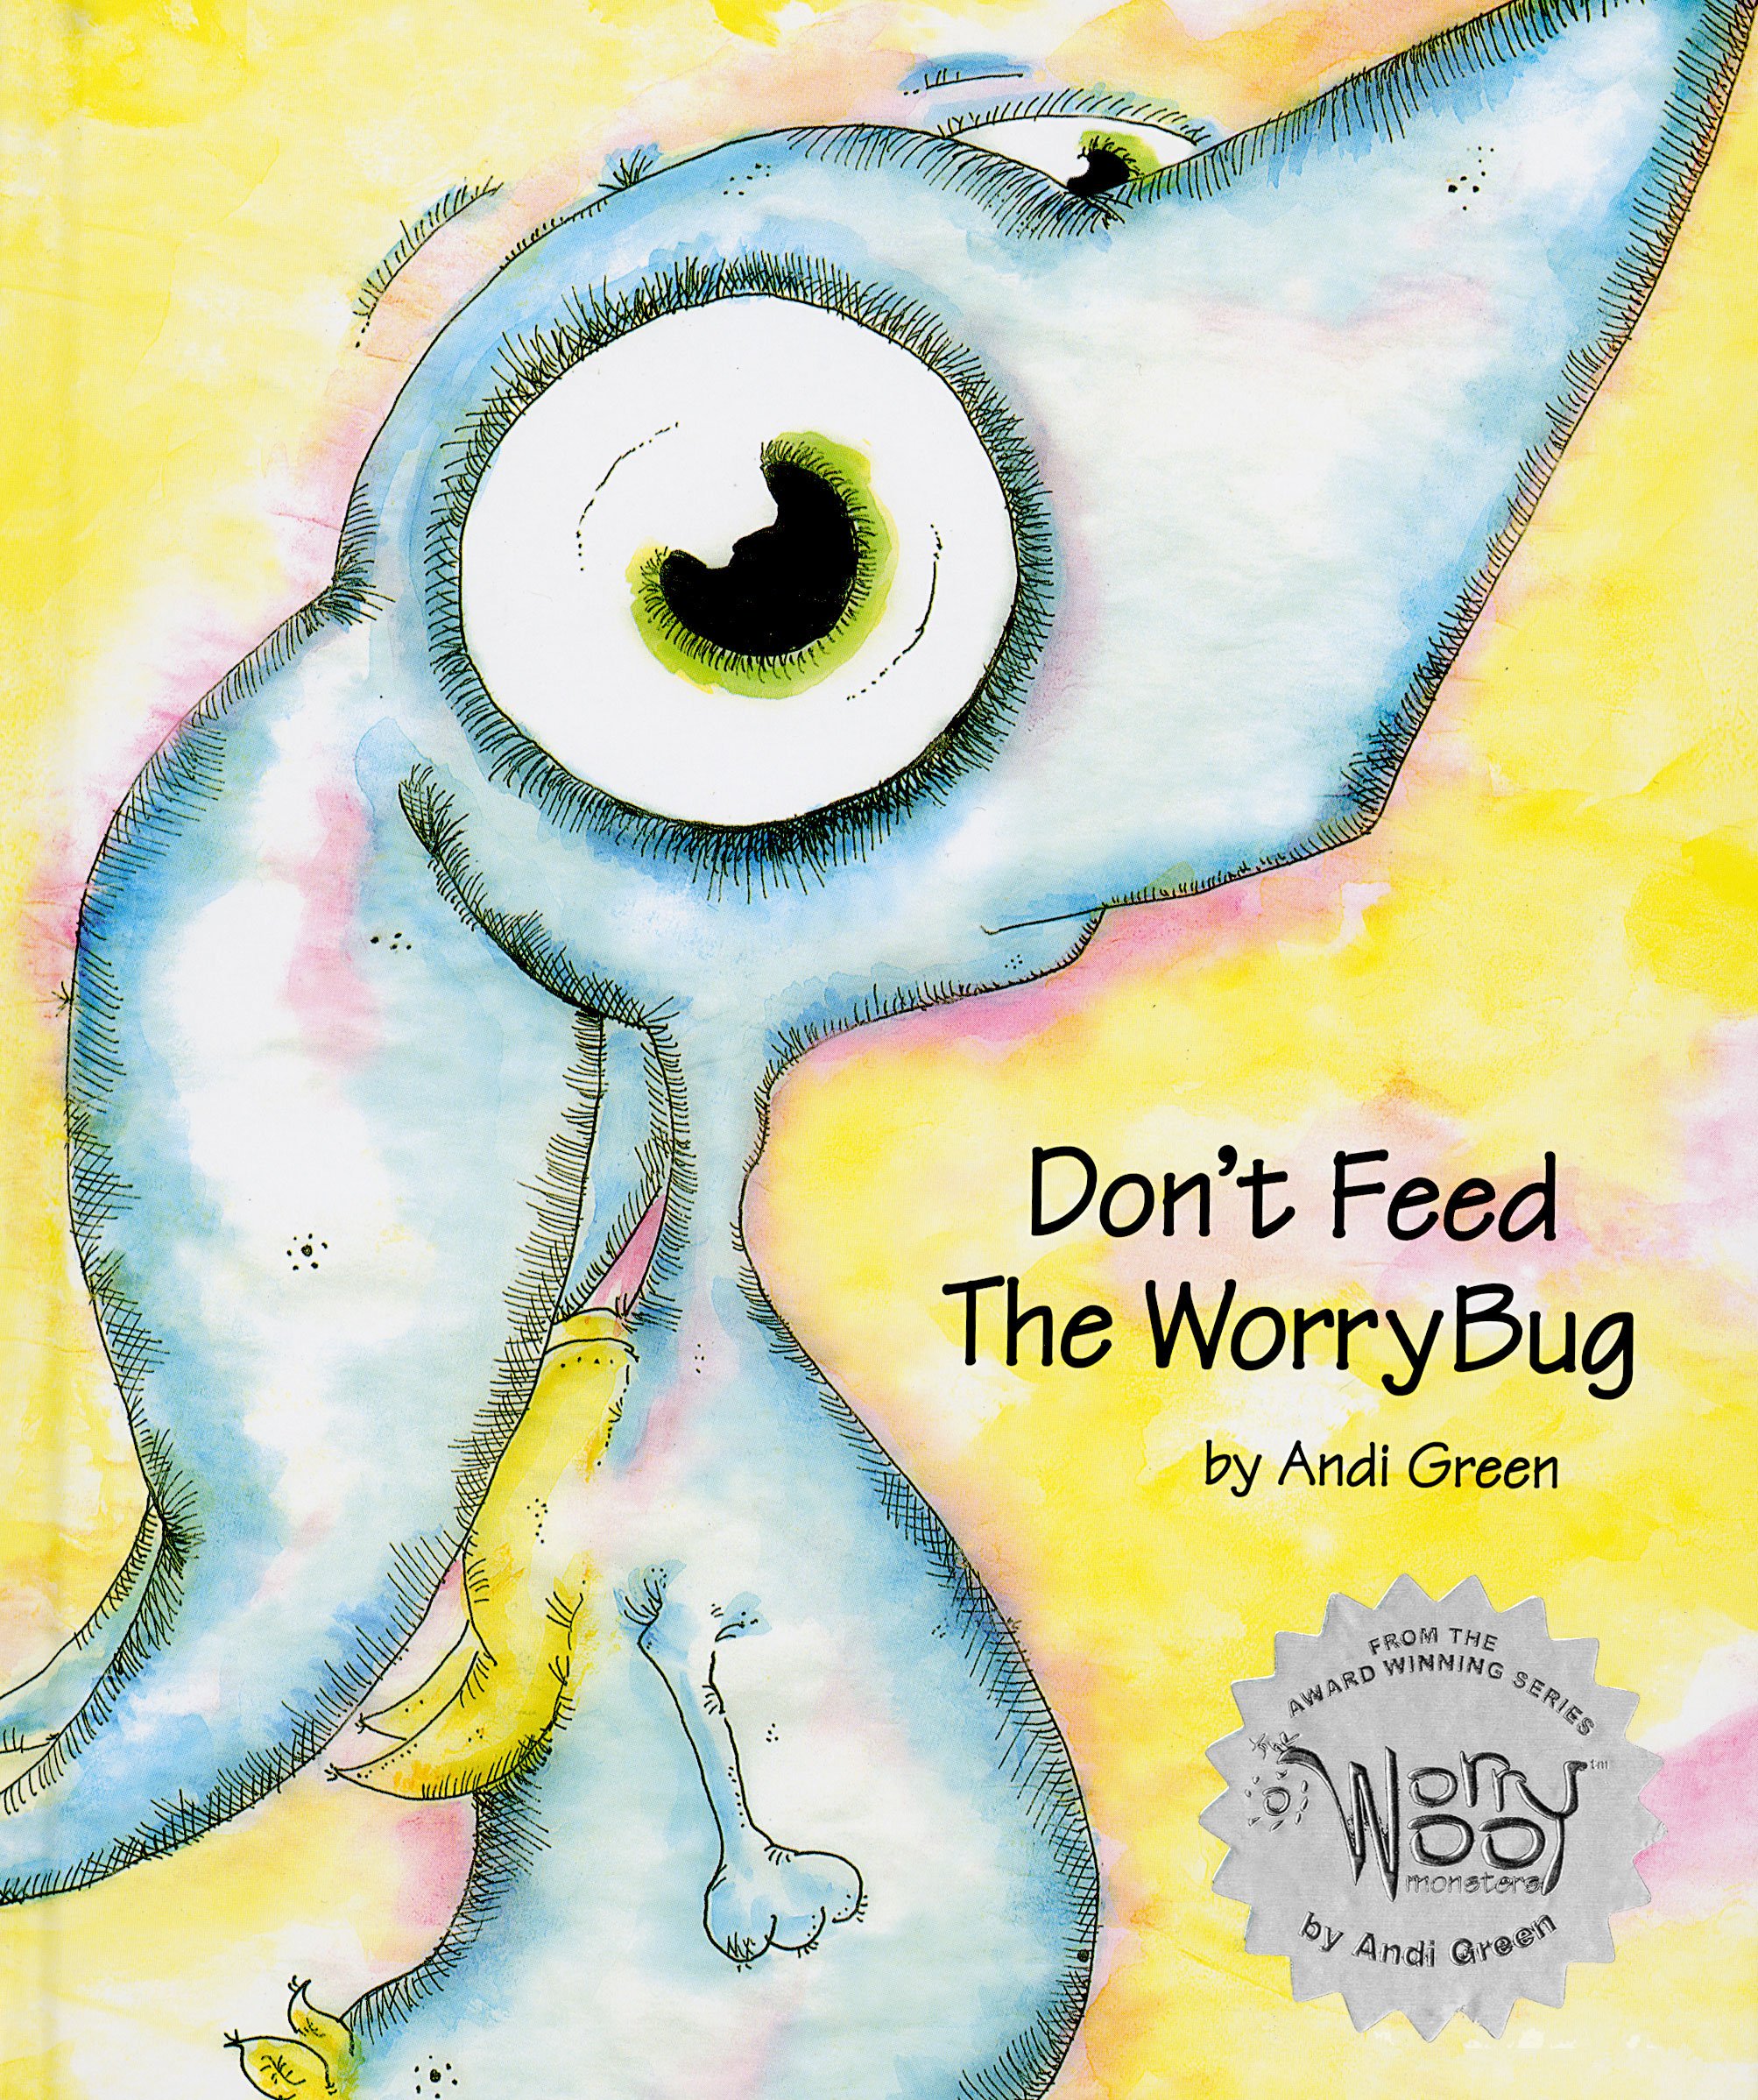 Don't Feed the Worry Bug